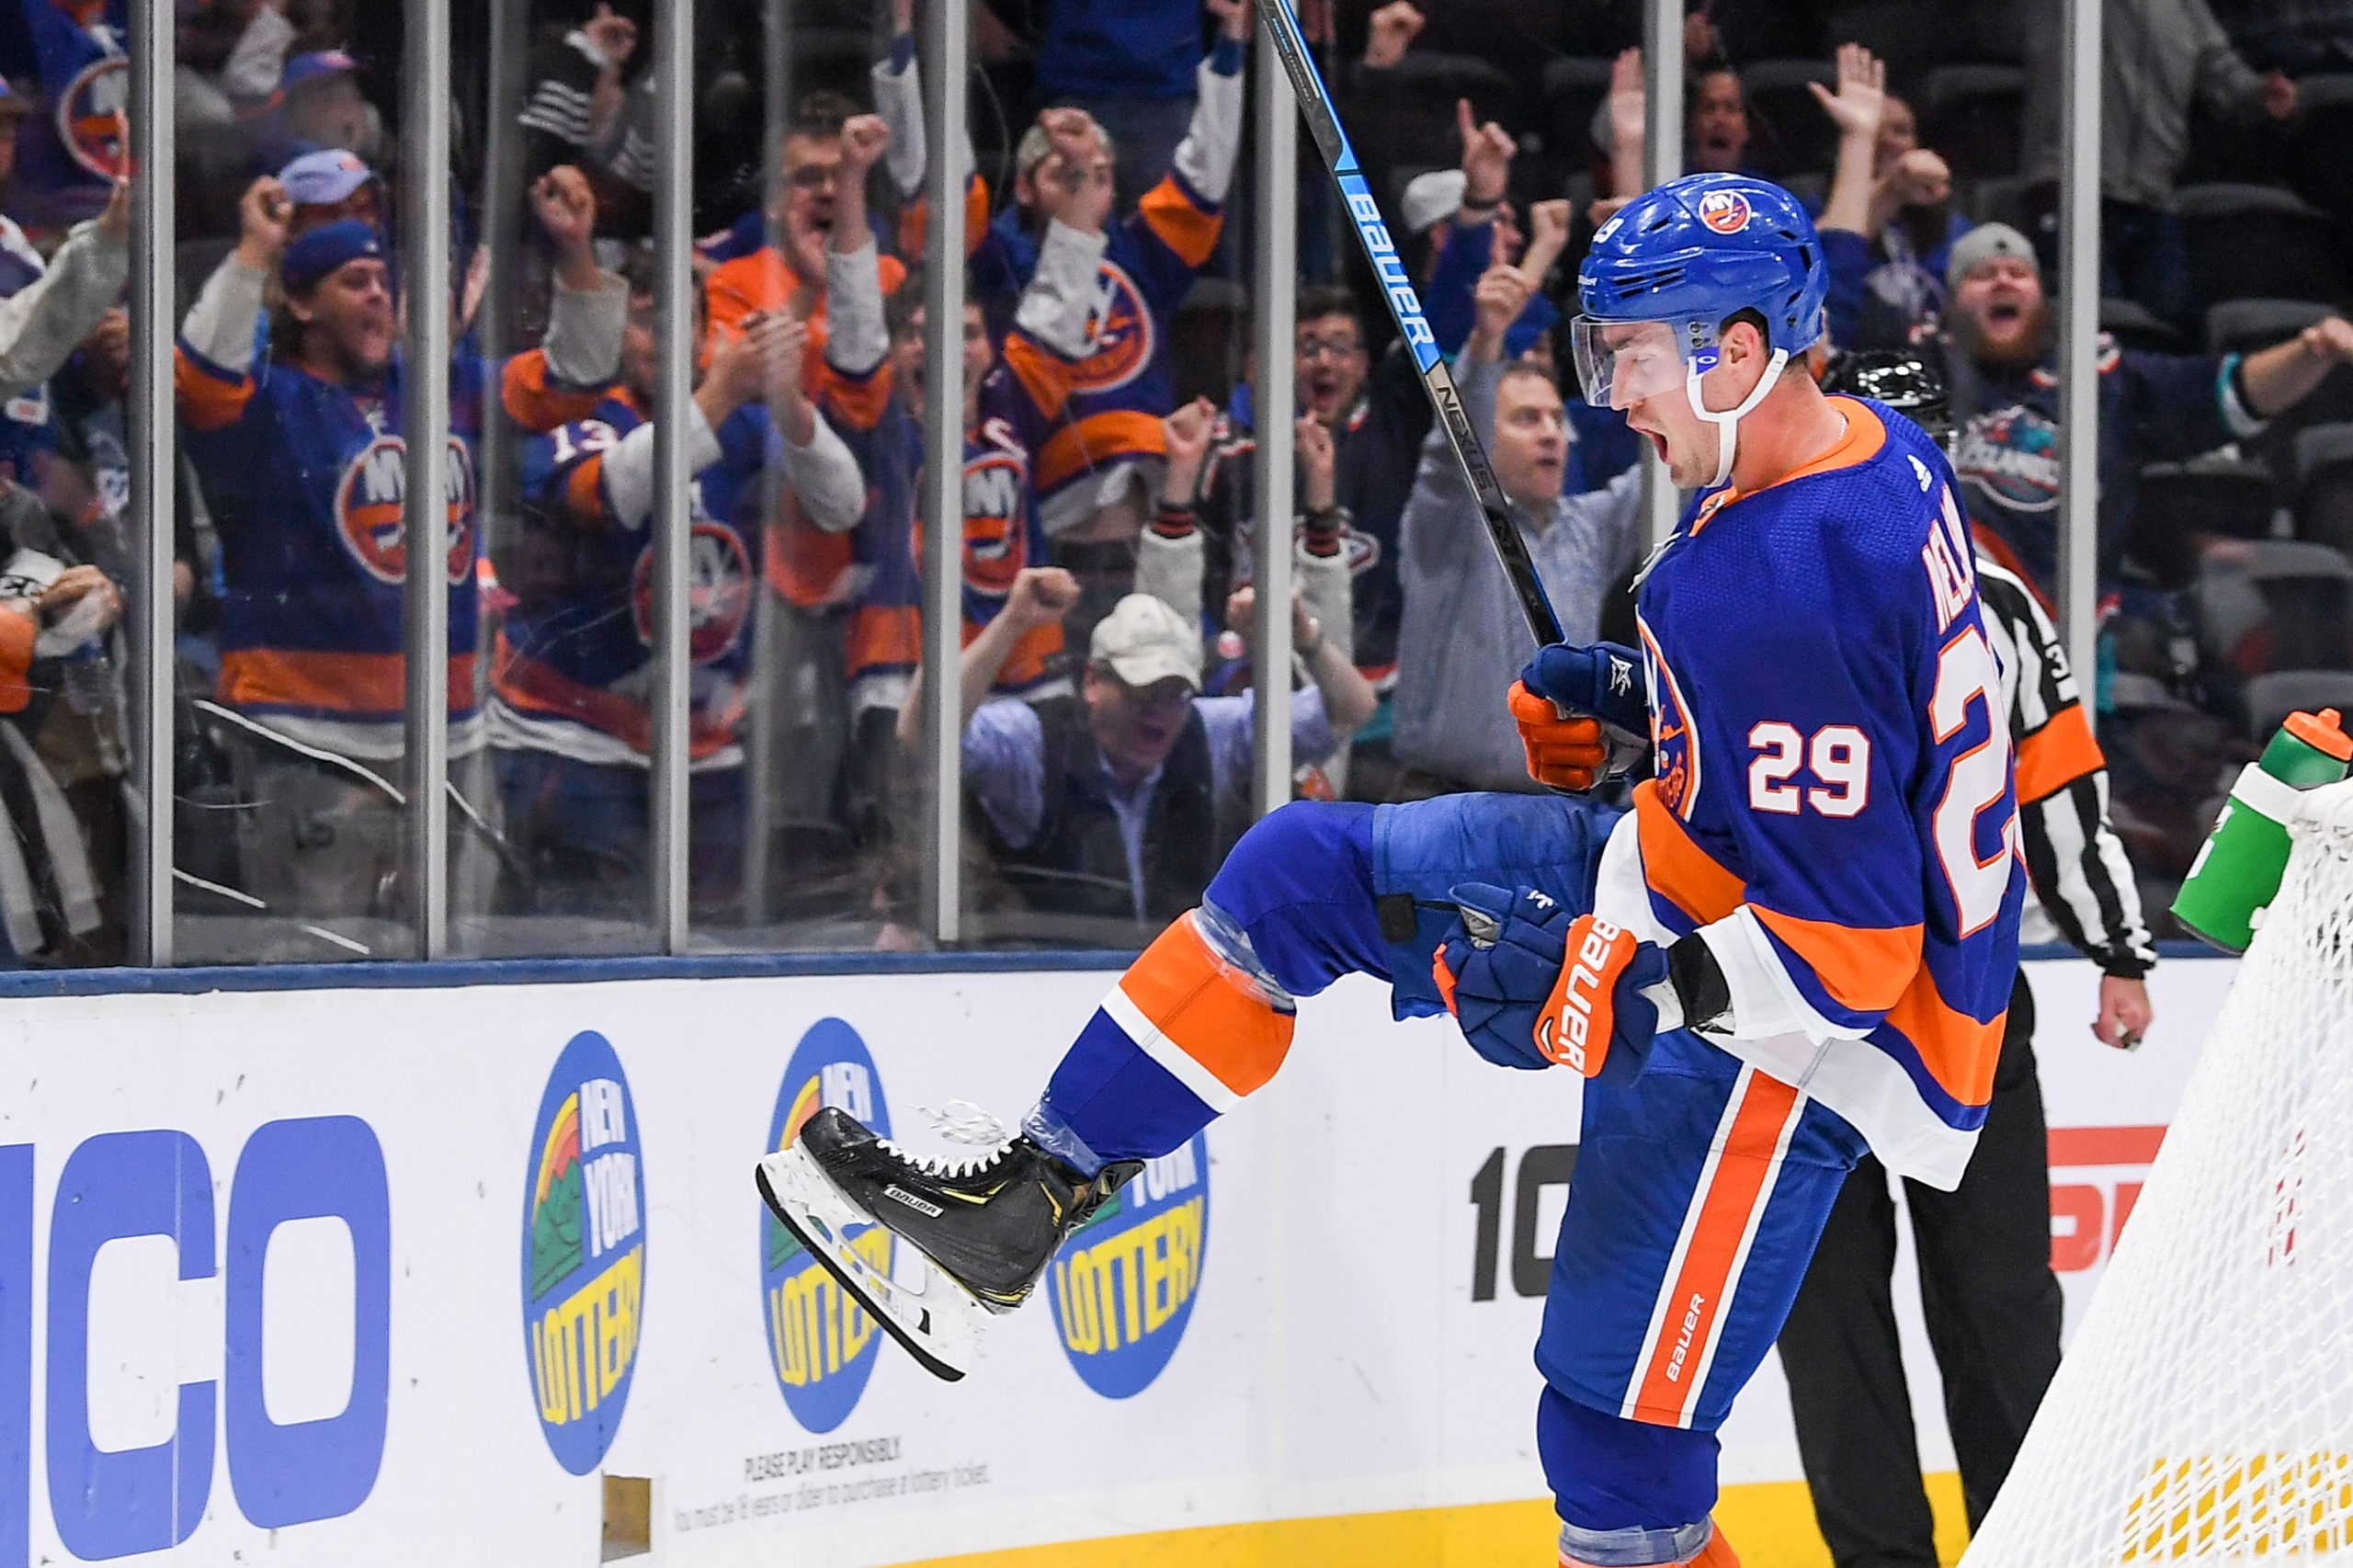 Oct 6, 2019; Brooklyn, NY, USA; New York Islanders center Brock Nelson (29) celebrates his goal against the Winnipeg Jets during the second period at Nassau Veterans Memorial Coliseum. Mandatory Credit: Dennis Schneidler-USA TODAY Sports